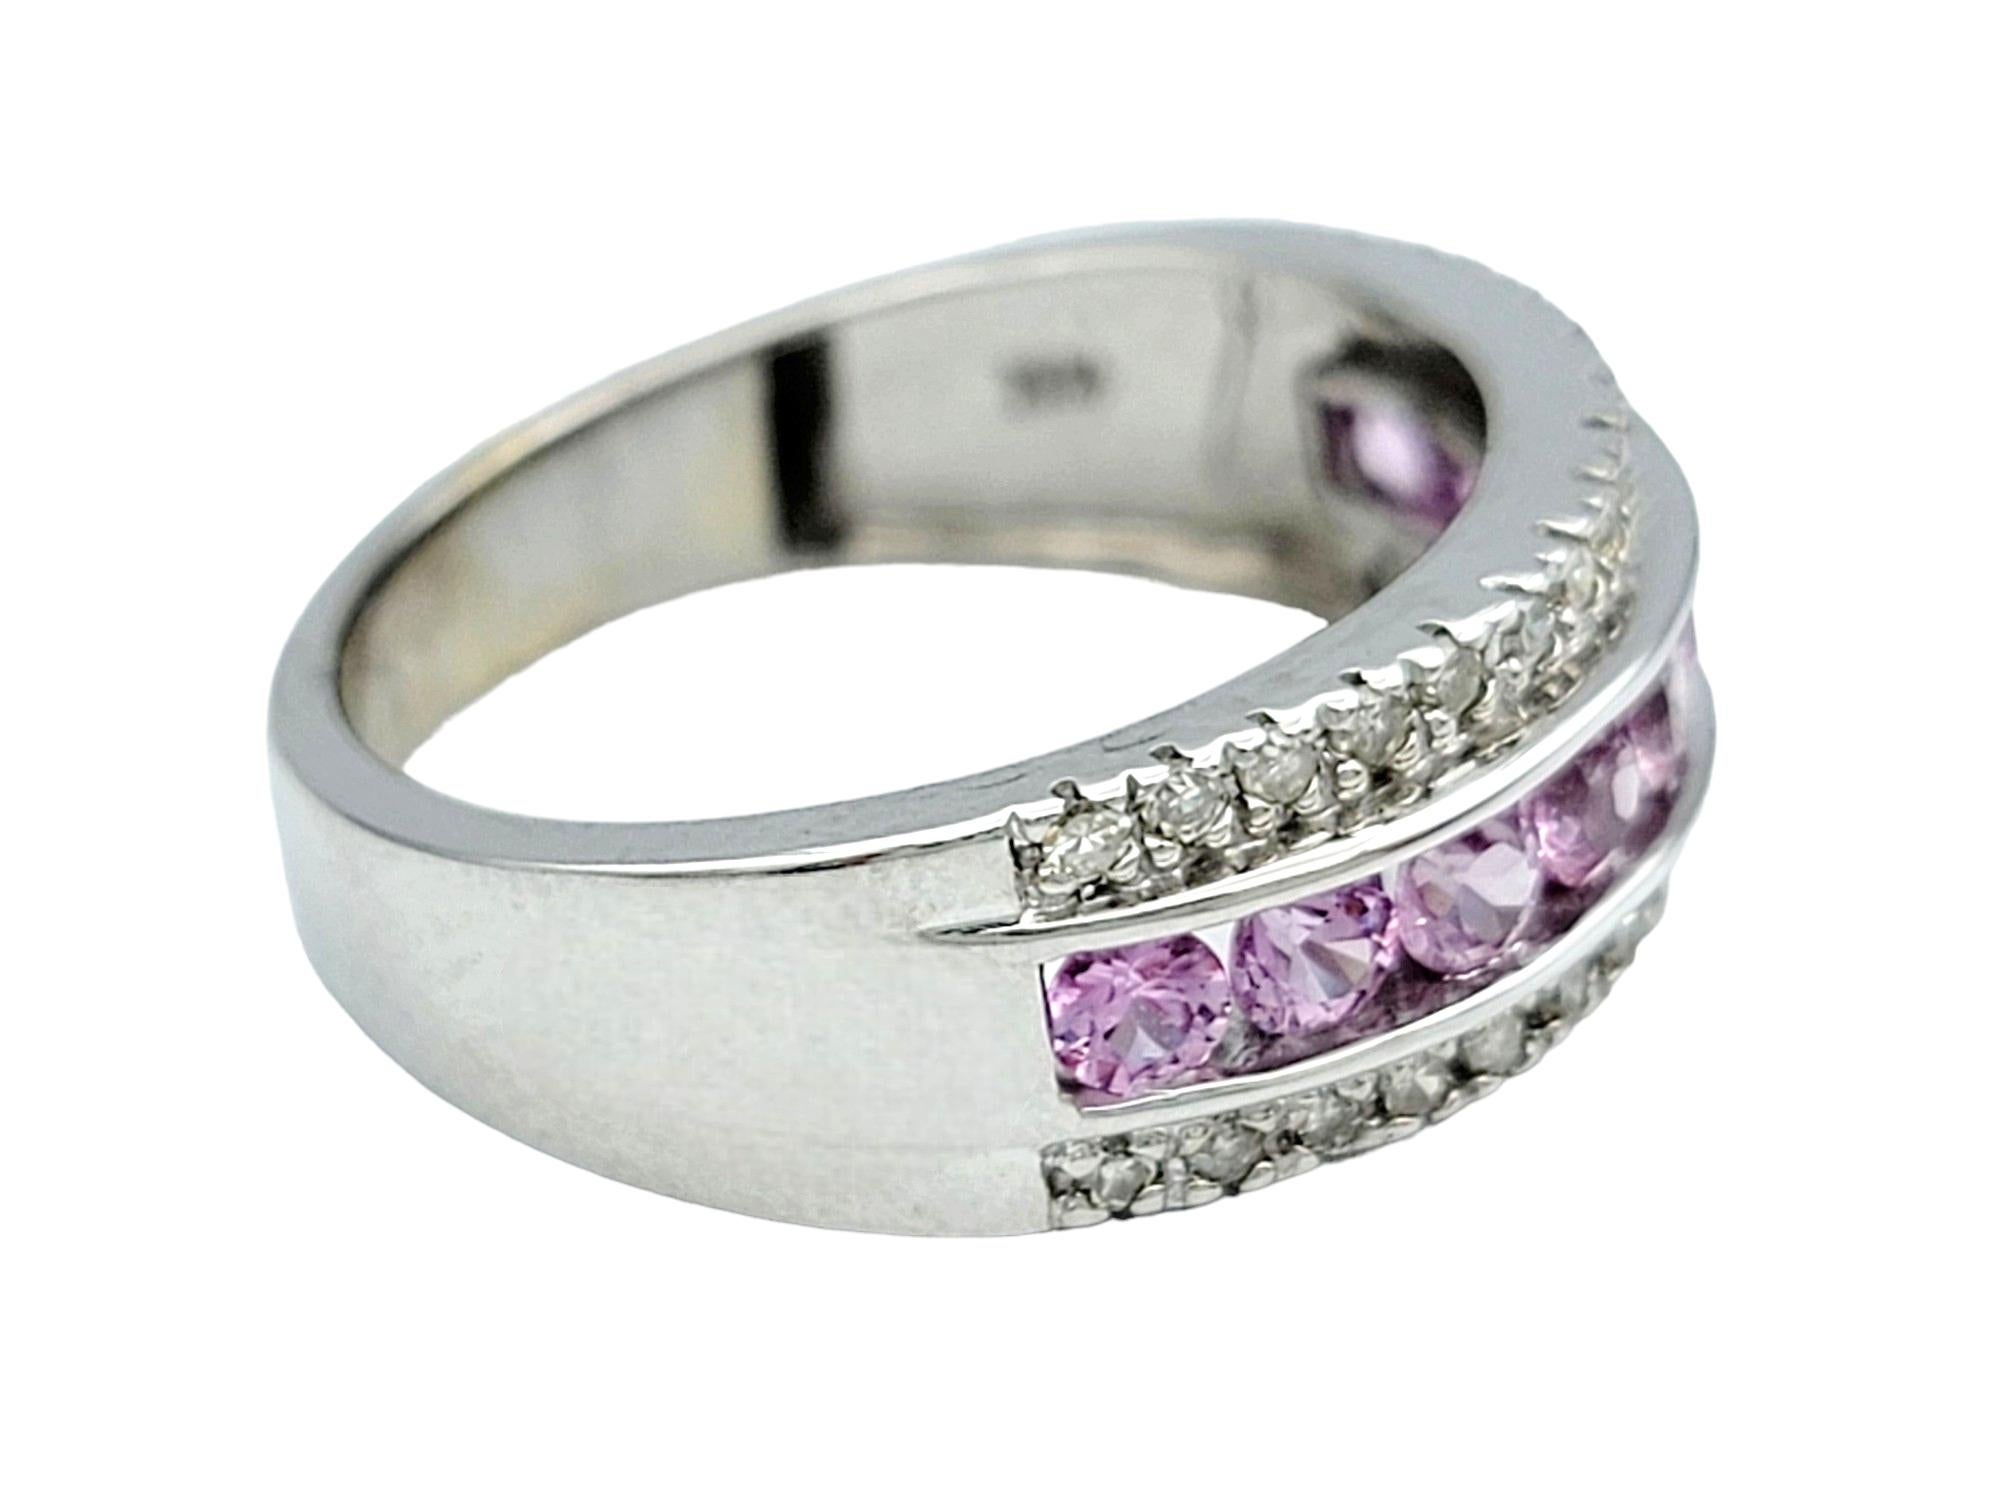 Channel-Set Pink Sapphire and Round Diamond Band Ring Set in 14 Karat White Gold In Good Condition For Sale In Scottsdale, AZ